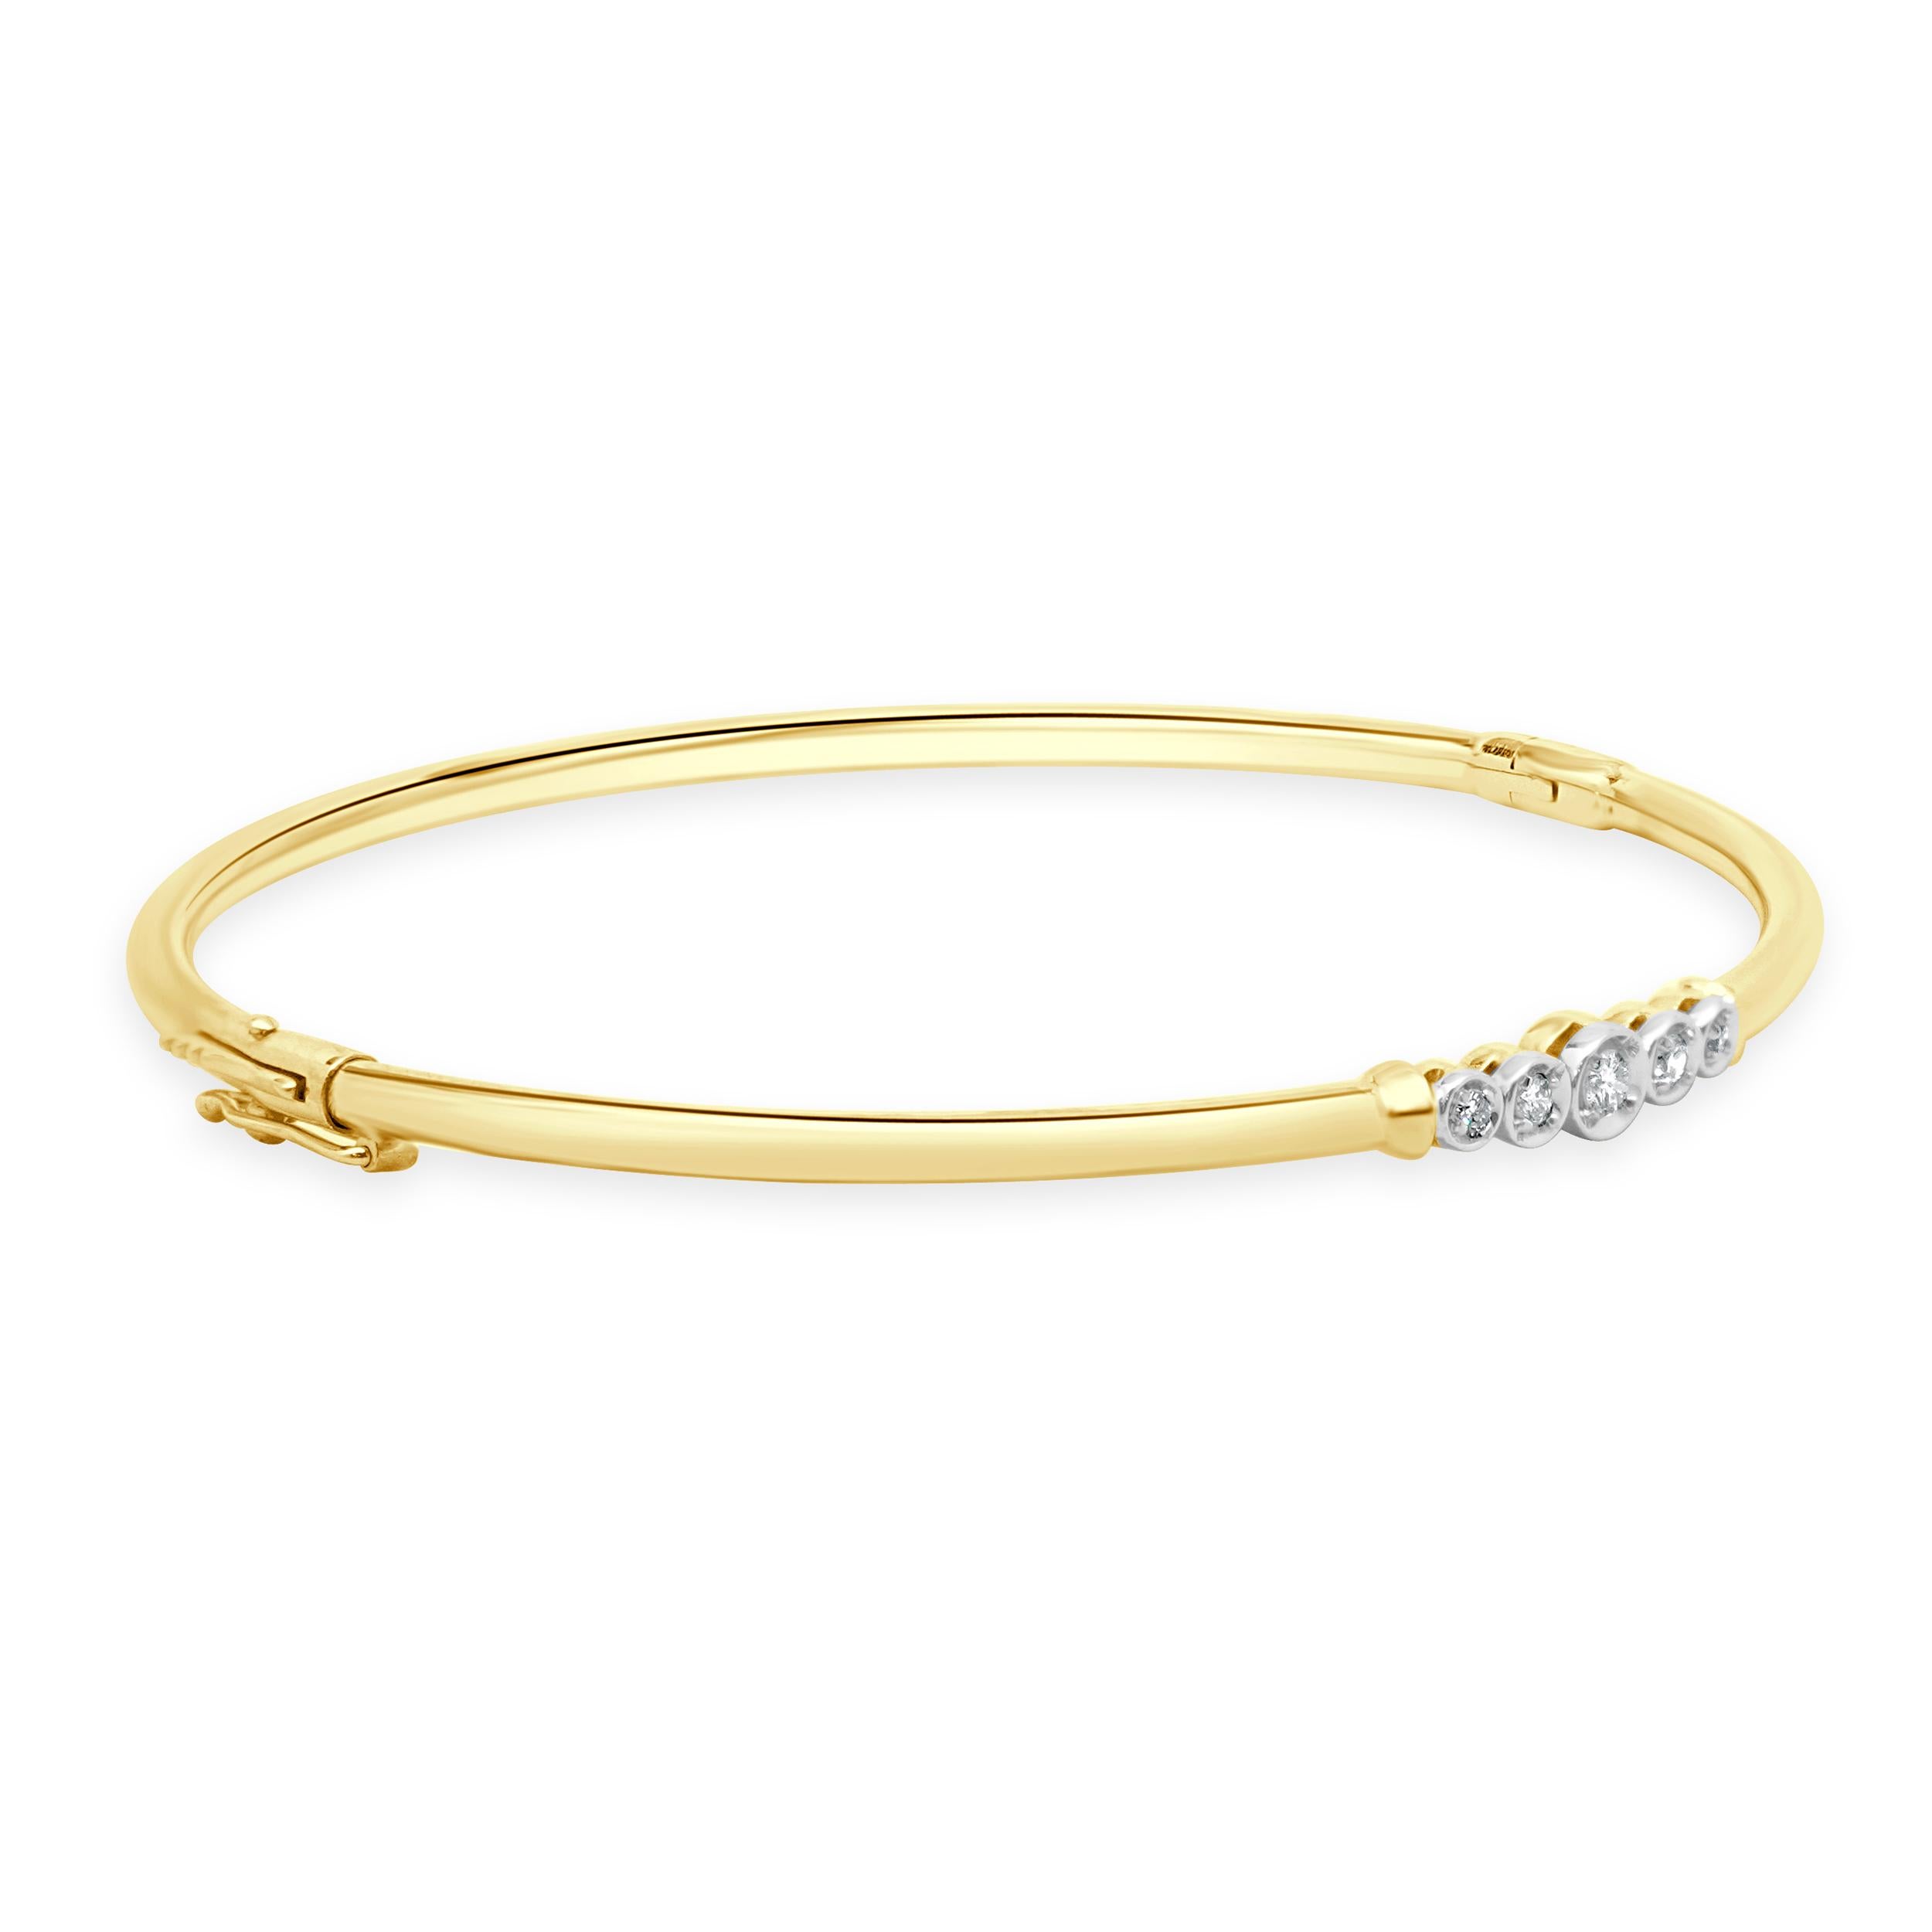 Designer: custom design
Material: 14K yellow & white gold
Diamond: 5 round cut = 0.15cttw
Color: H 
Clarity: SI2
Dimensions: bracelet will fit up to a 6.75-inch wrist
Weight: 4.61 grams
